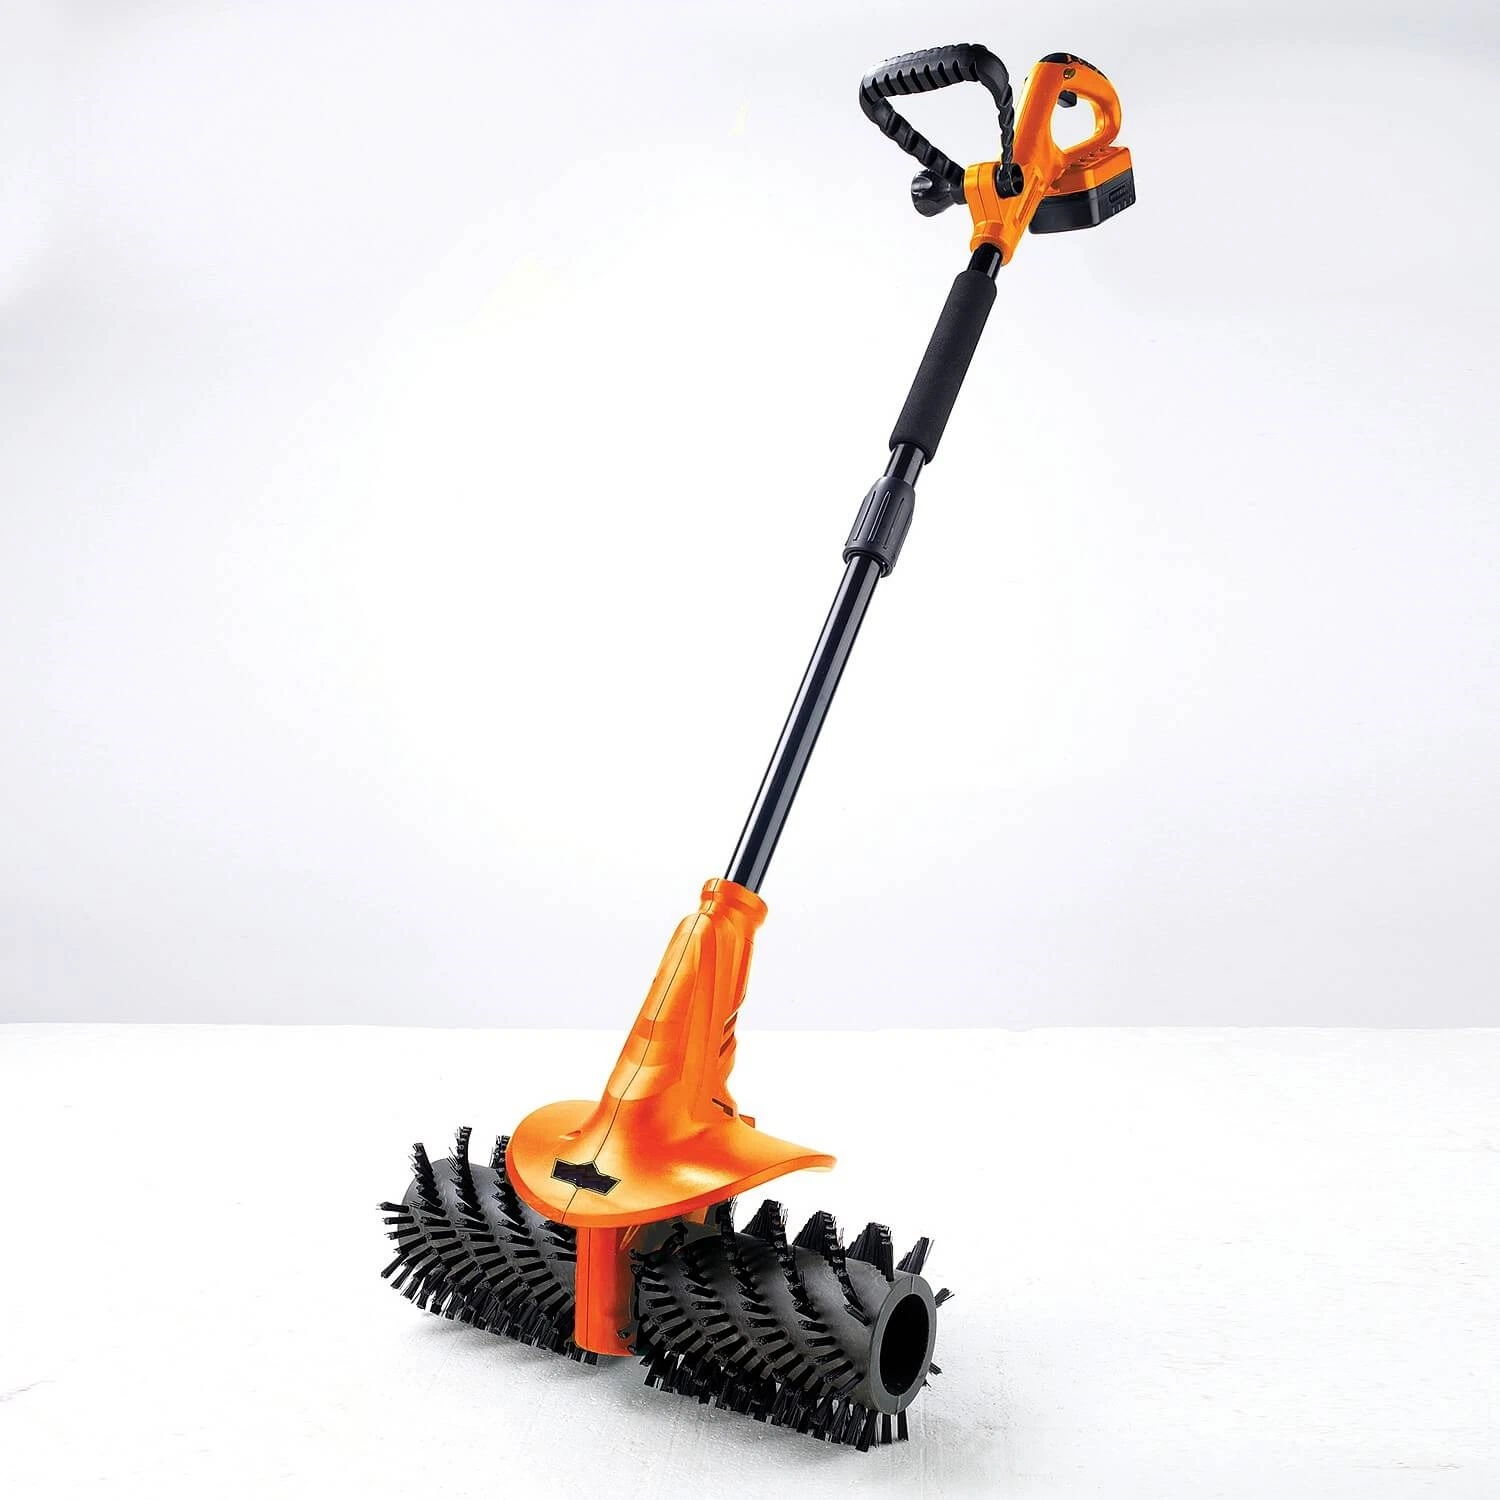 2022-DC20V Max-Li-ion Battery-Cordless/Electric-Garden Cleaning-Tool Machines-Artificial/Lawn Grass-Power Brush/Sweeper